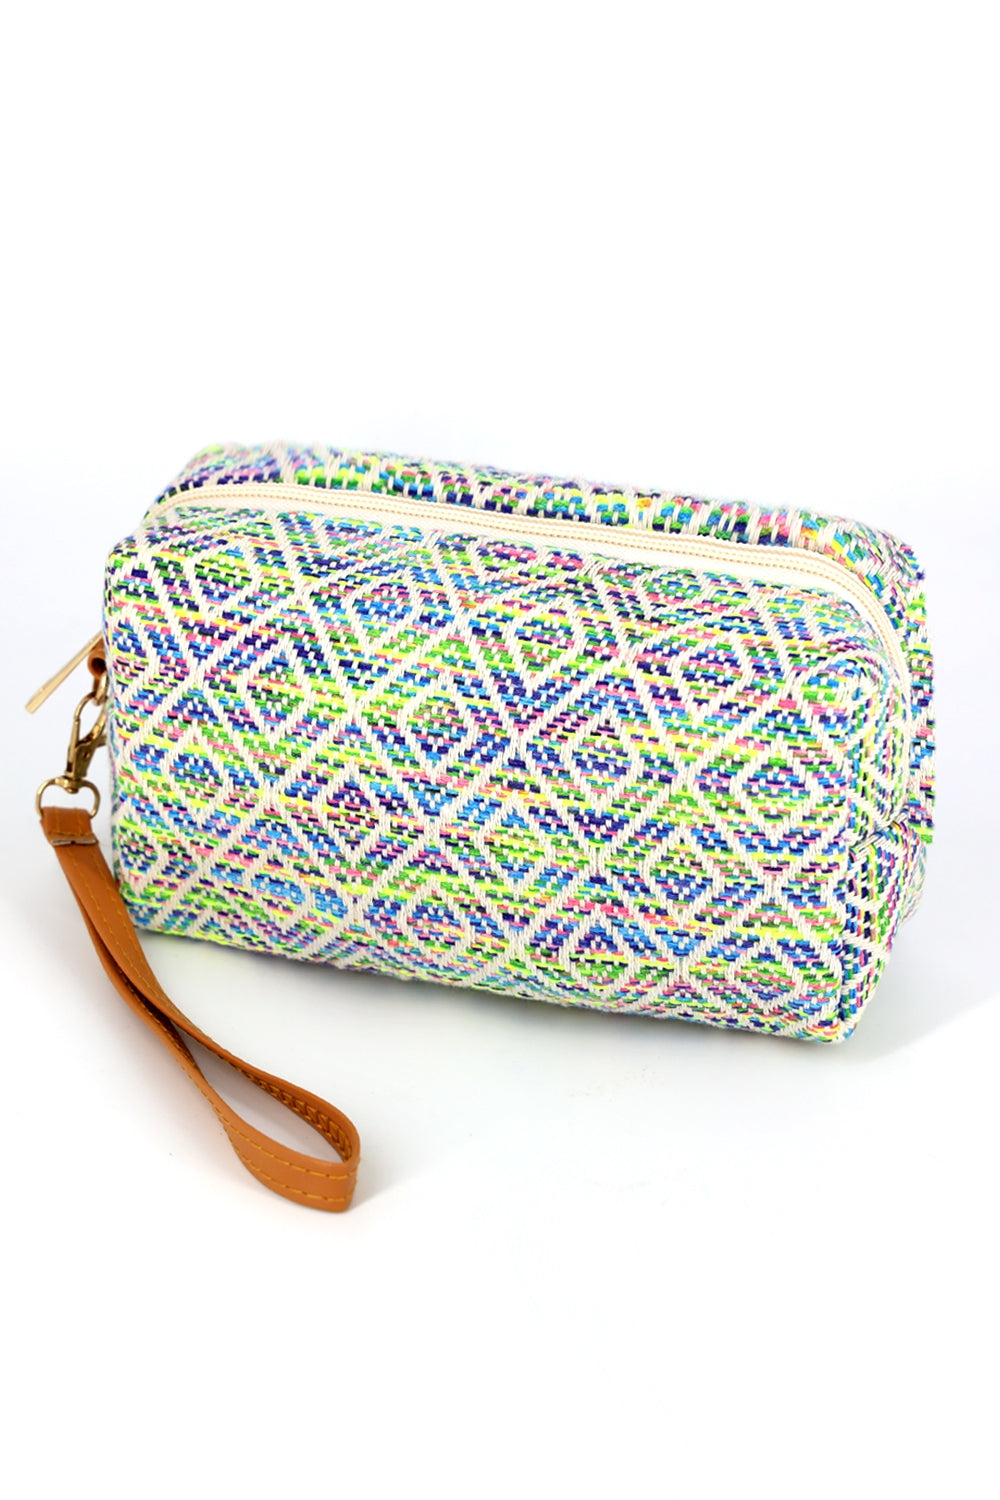 Aztec Pattern Pouch Wristlet Green - Pack of 6